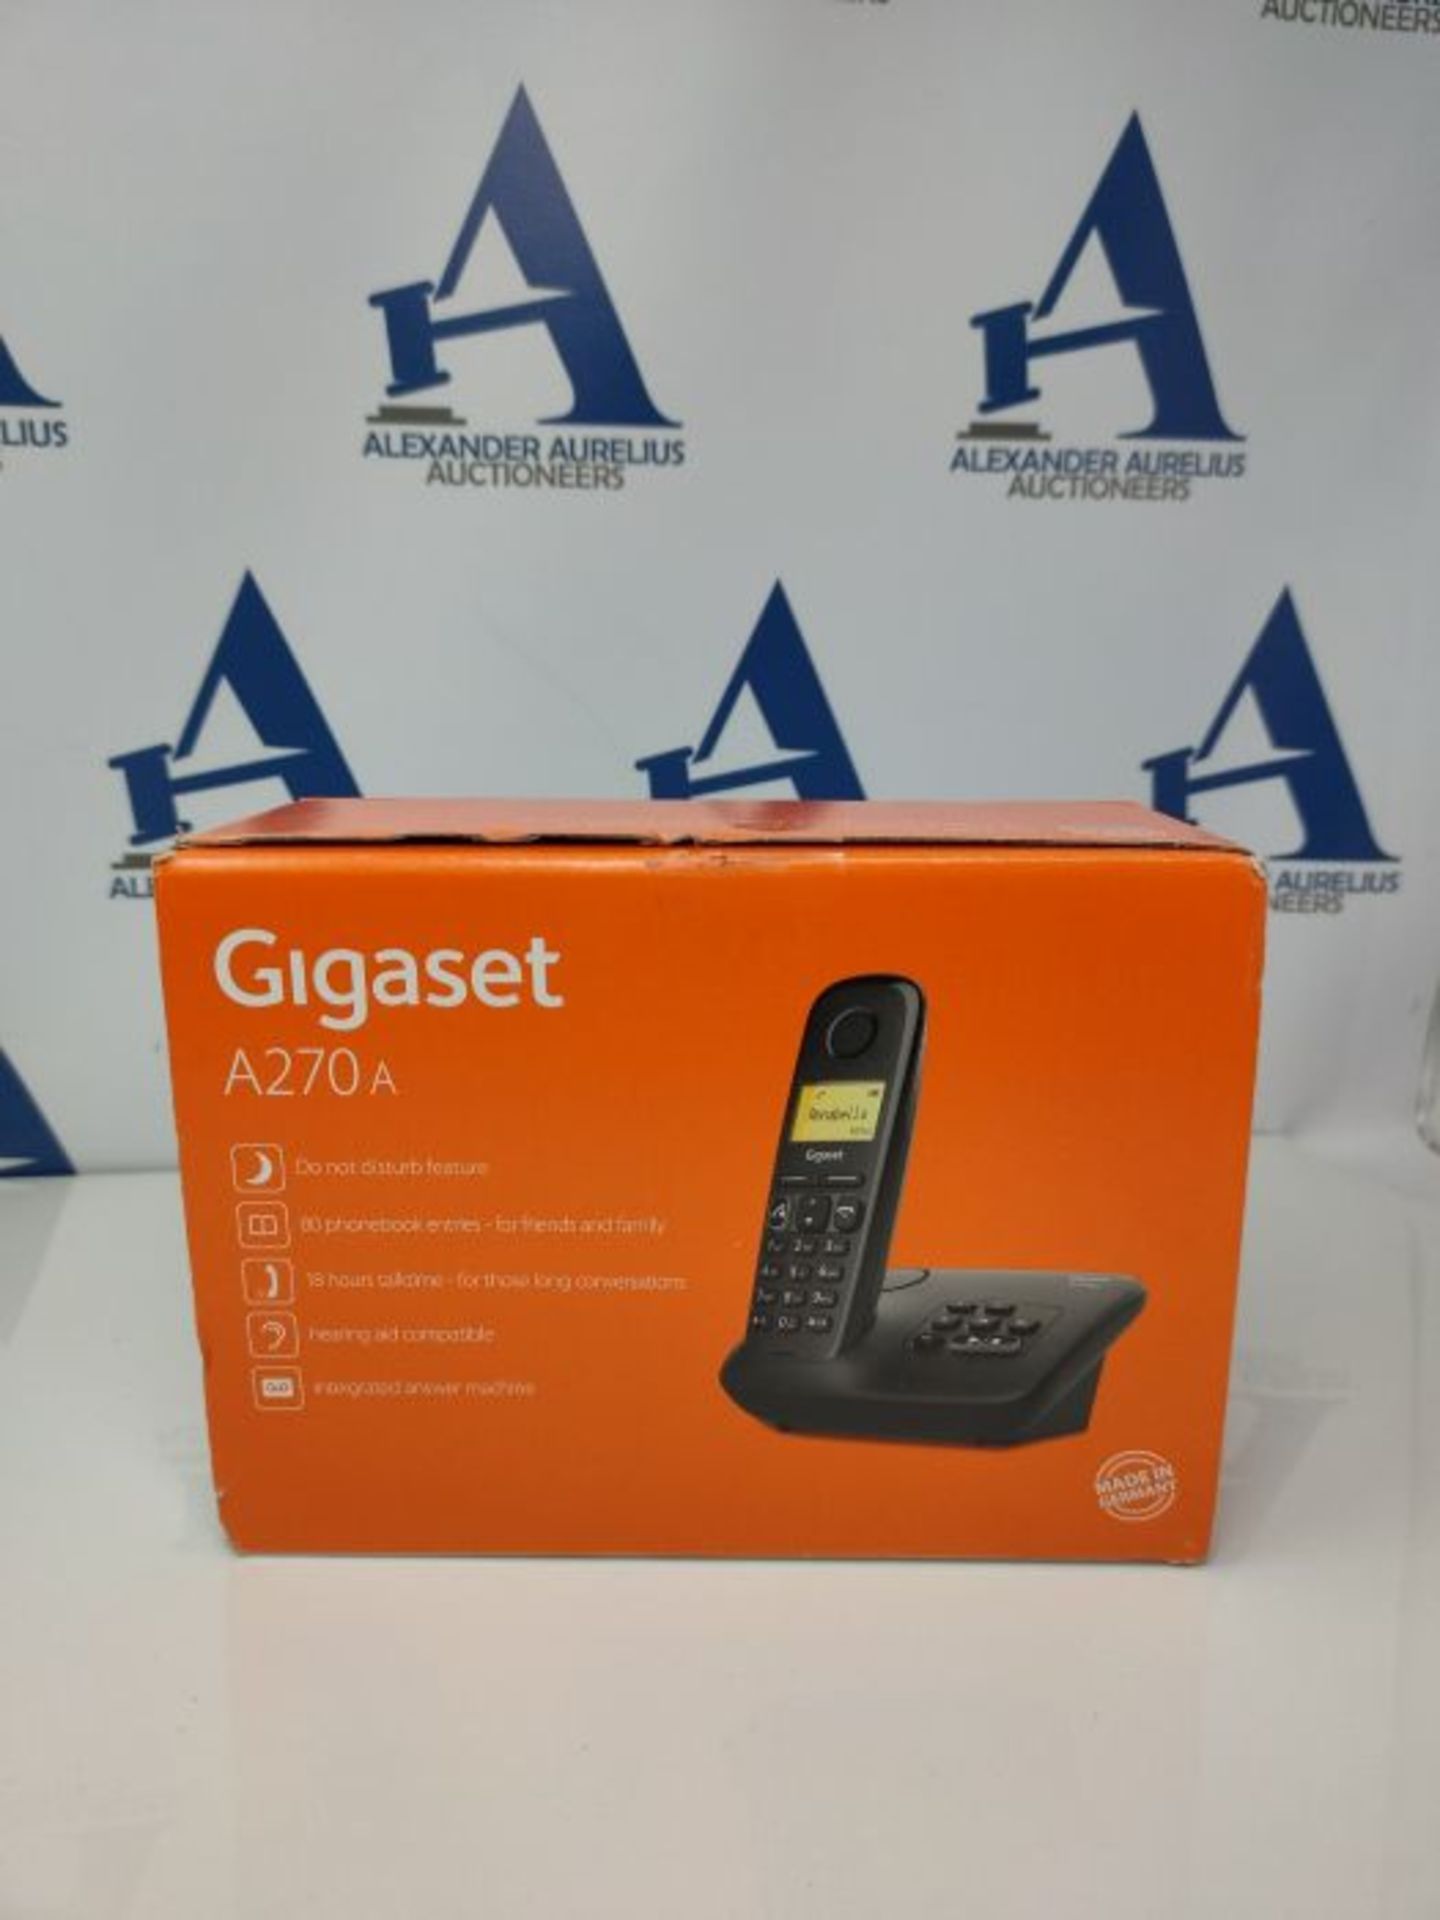 Gigaset A270A - Basic Cordless Home Phone with Big Display, Answer Machine and Speaker - Image 2 of 3